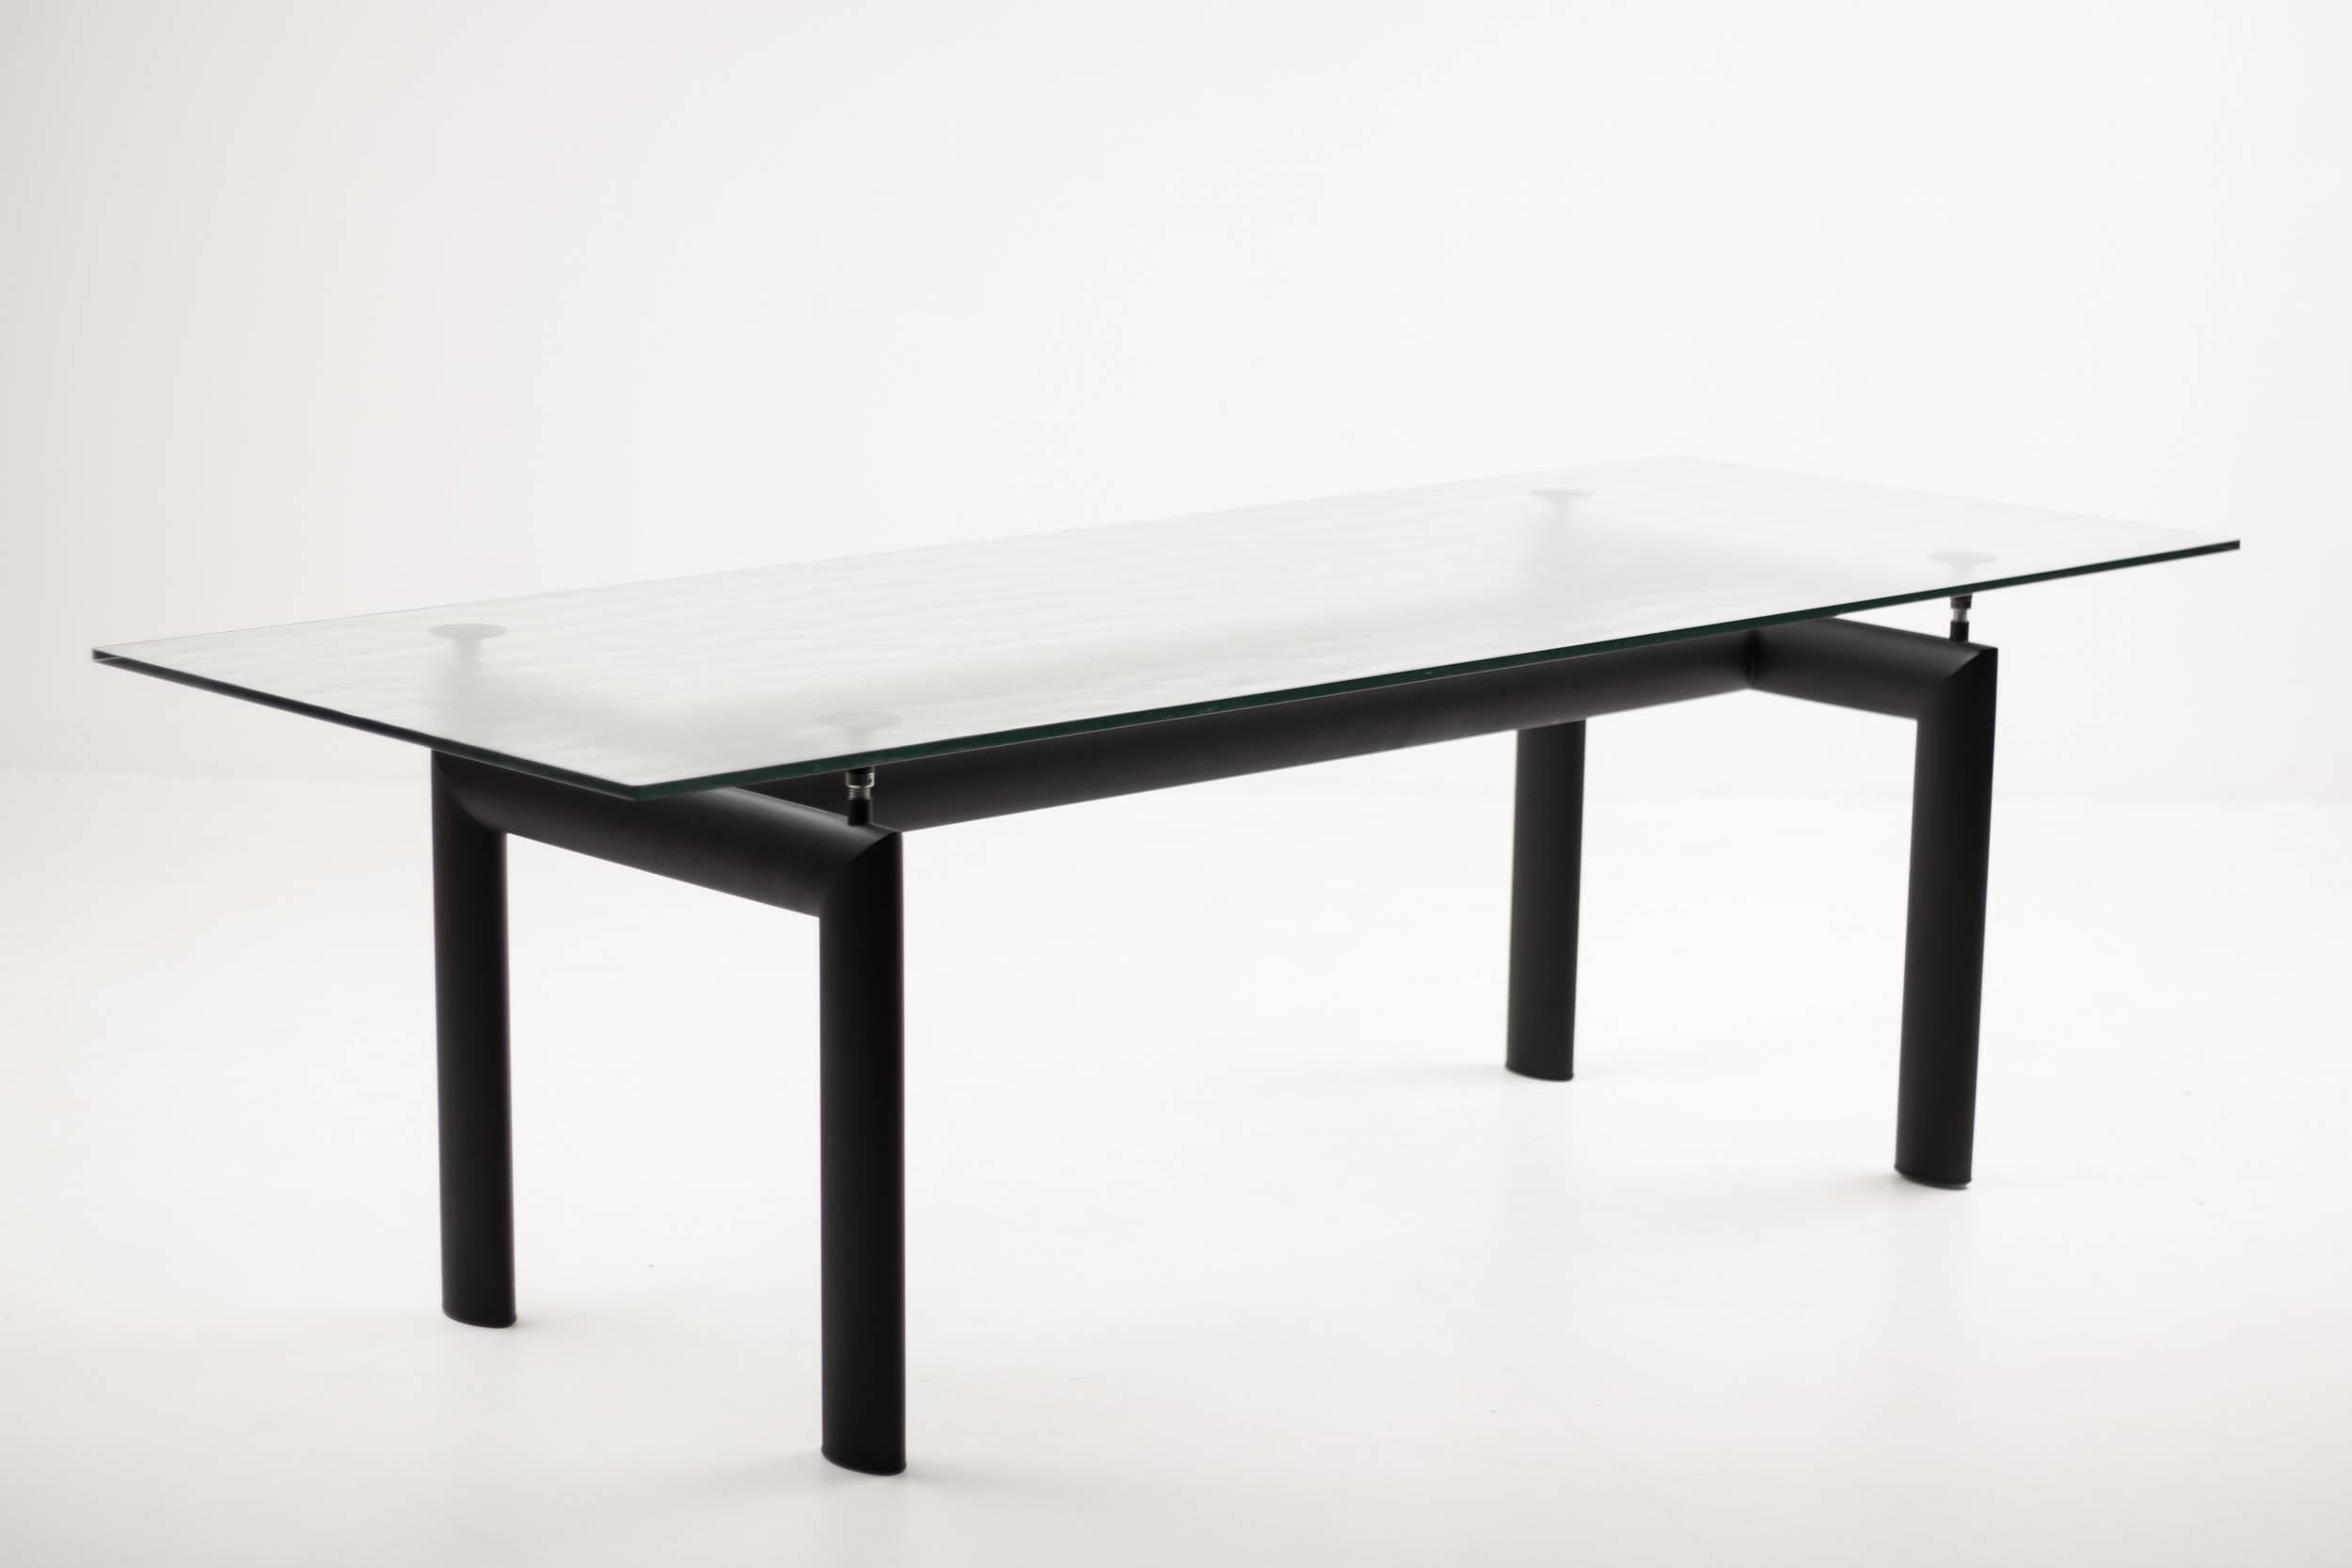 Aluminum LC6 Table by Le Corbusier, Jeanneret and Perriand for Cassina